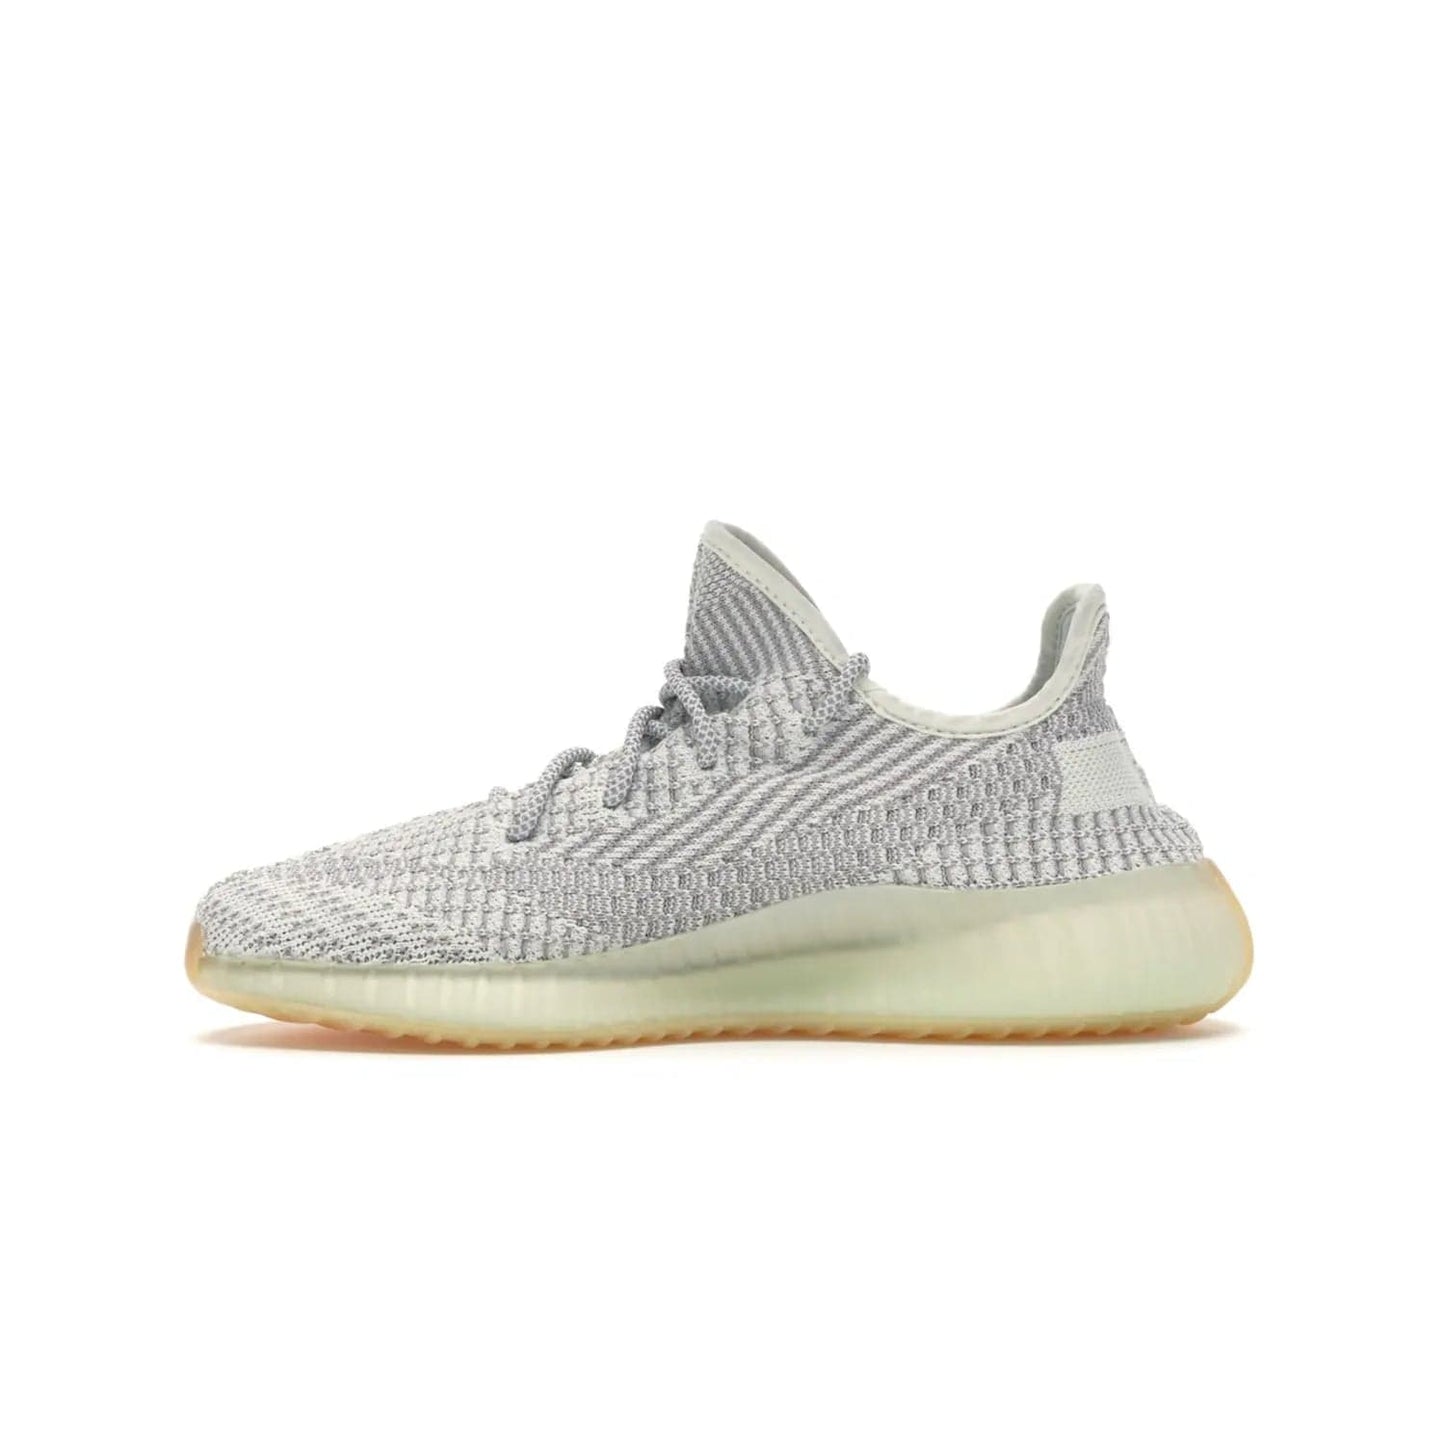 adidas Yeezy Boost 350 V2 Yeshaya (Non-Reflective) - Image 19 - Only at www.BallersClubKickz.com - Step out in style with the adidas Yeezy Boost 350 V2 Yeshaya (Non-Reflective). Gray-and-white Primeknit upper with mesh side stripe & rope laces, plus a translucent Boost sole with a hint of yellow. Make a statement and feel comfortable with this stylish sneaker.